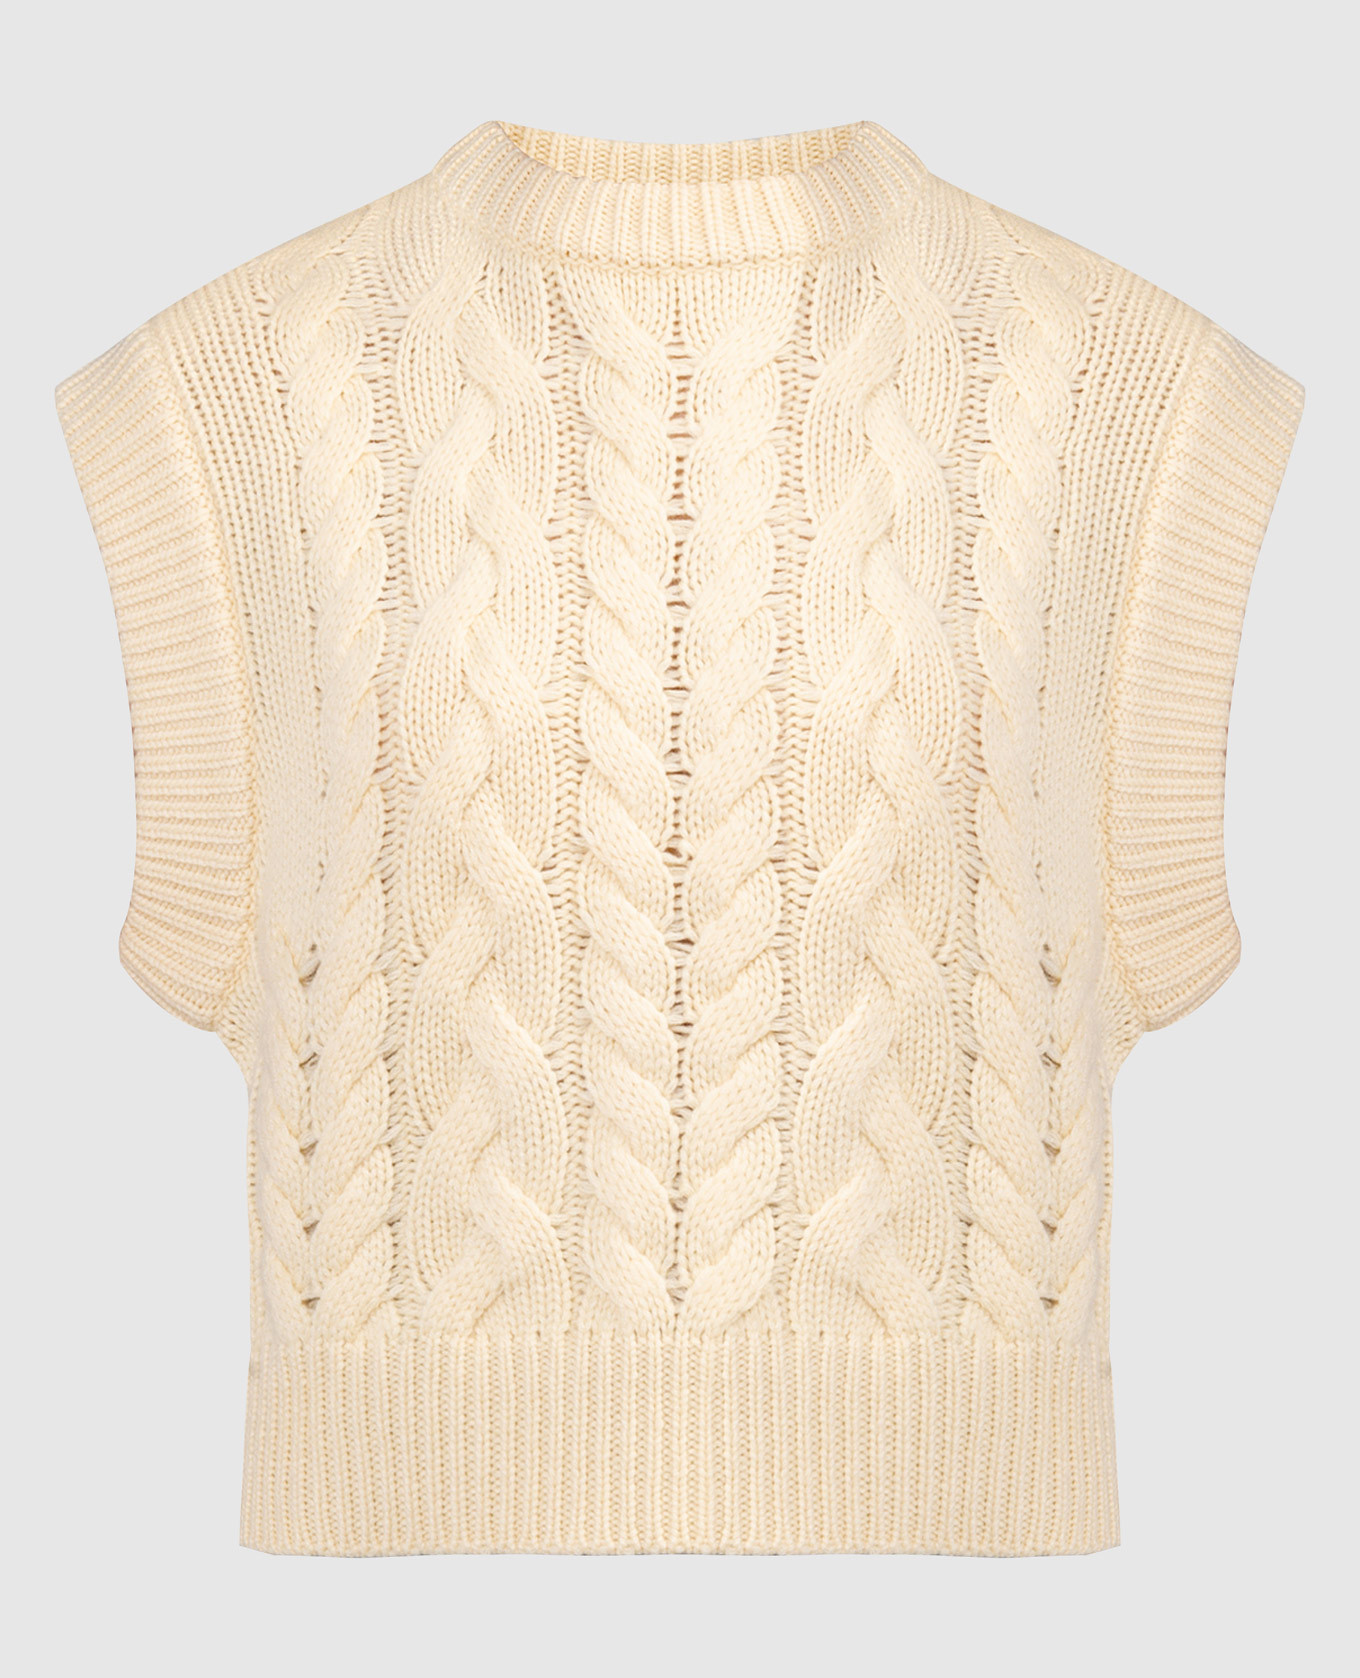 Yellow vest made of cashmere in a textured pattern